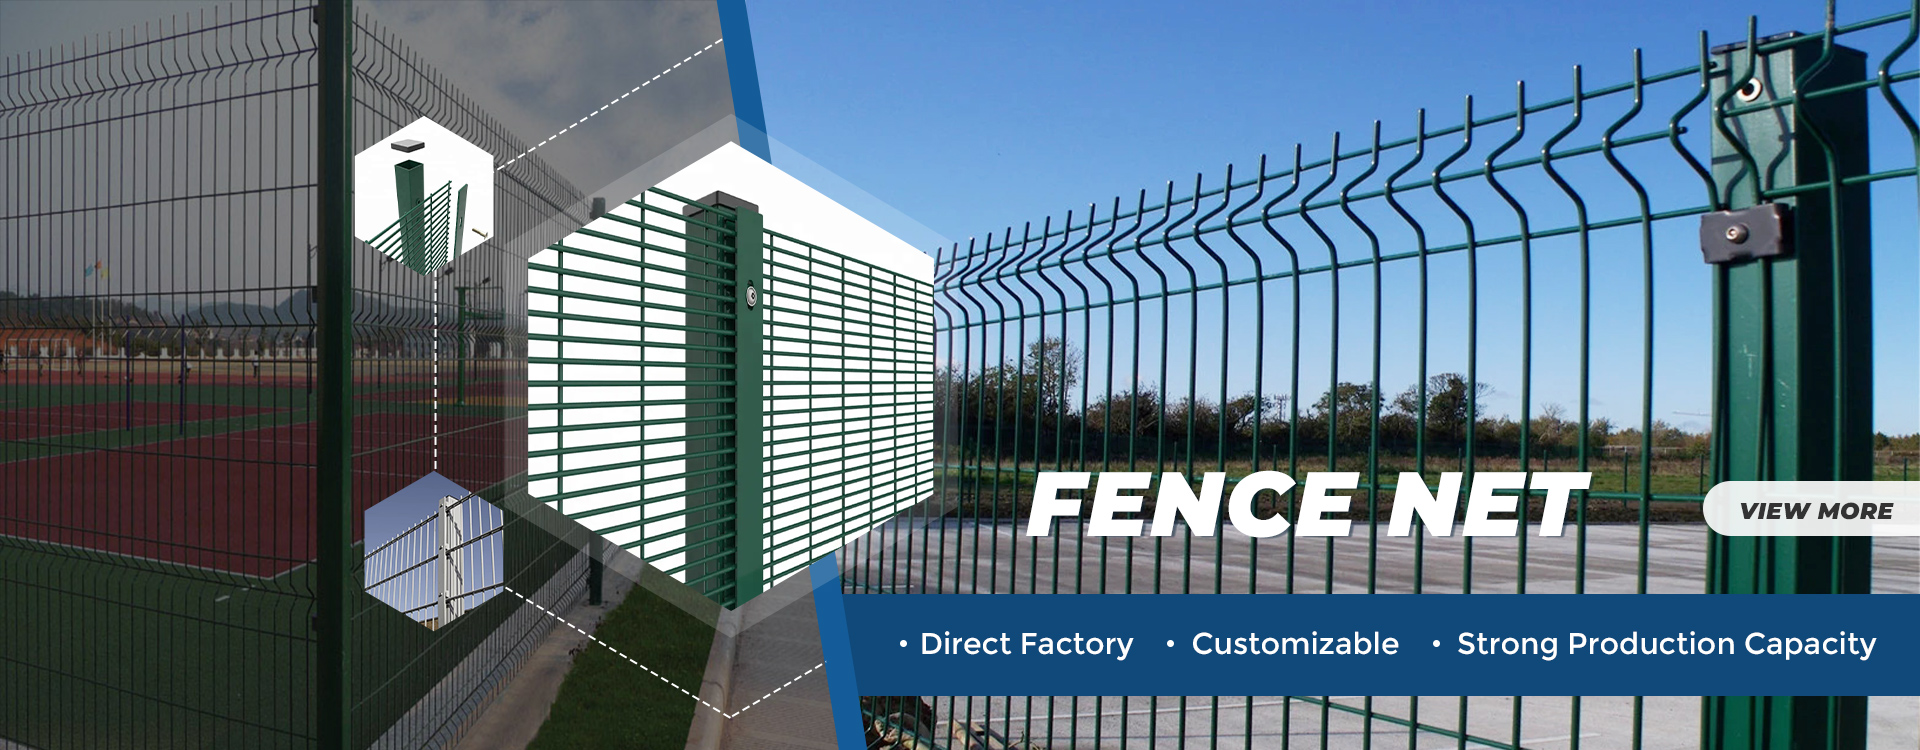 Benefits and Features of 358 Security Fence